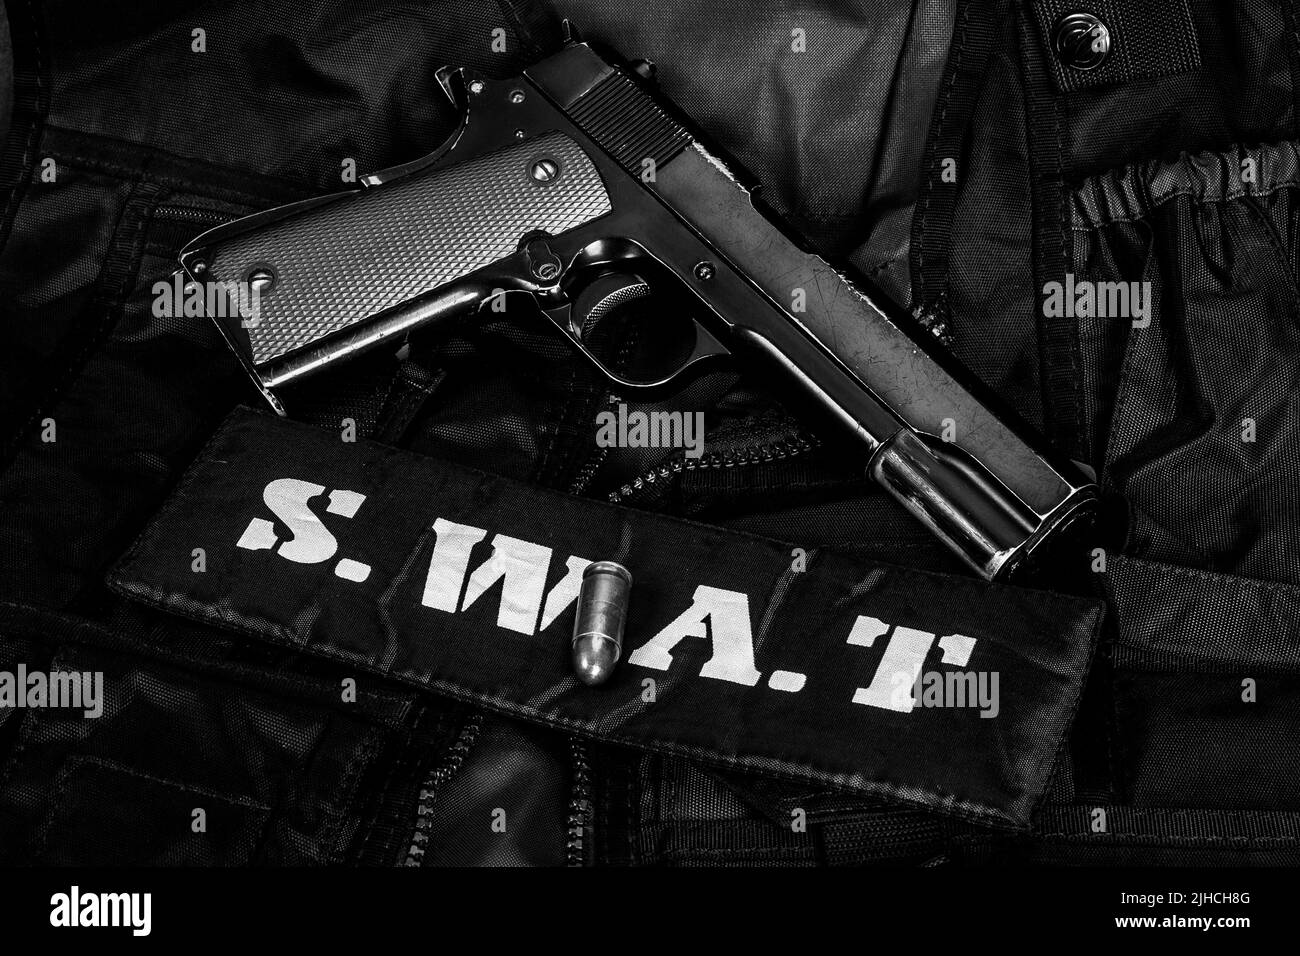 SWAT (Special weapons and tactics) team equipment with hand gun on black uniform background Stock Photo